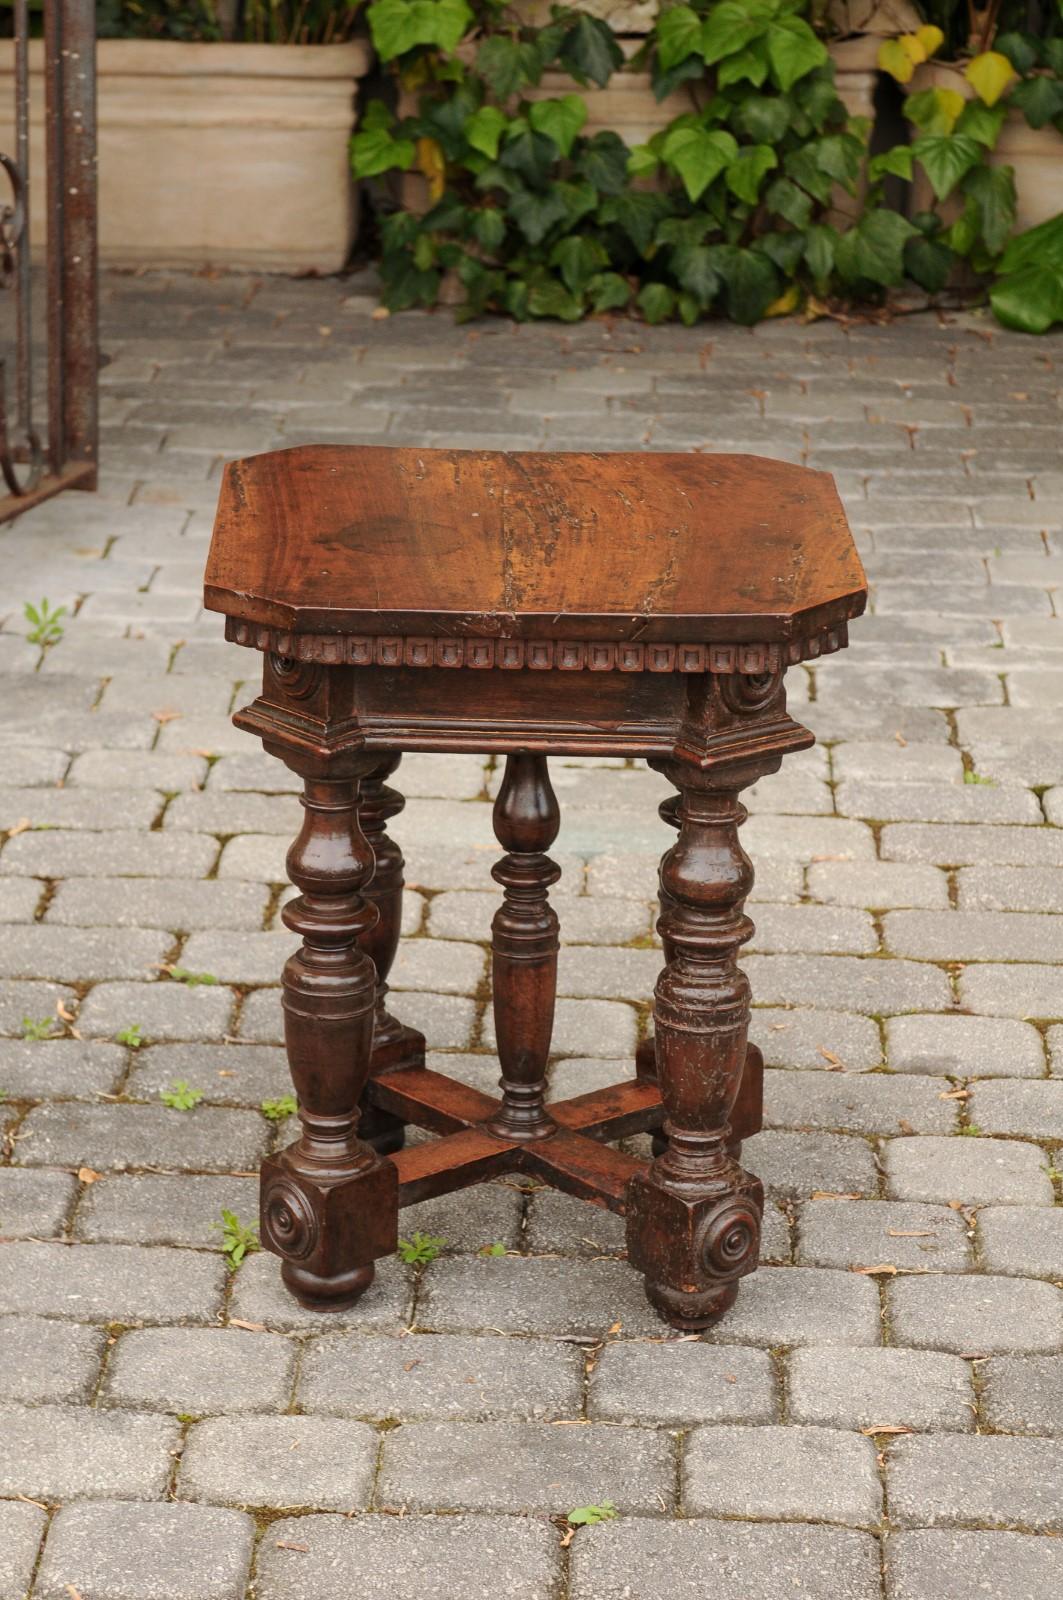 An Italian walnut side table from the mid-19th century, with scooped patterns, unusual turned base, cross stretcher and medallions. Born in Italy during the third quarter of the 19th century, this charming walnut side table features a square top